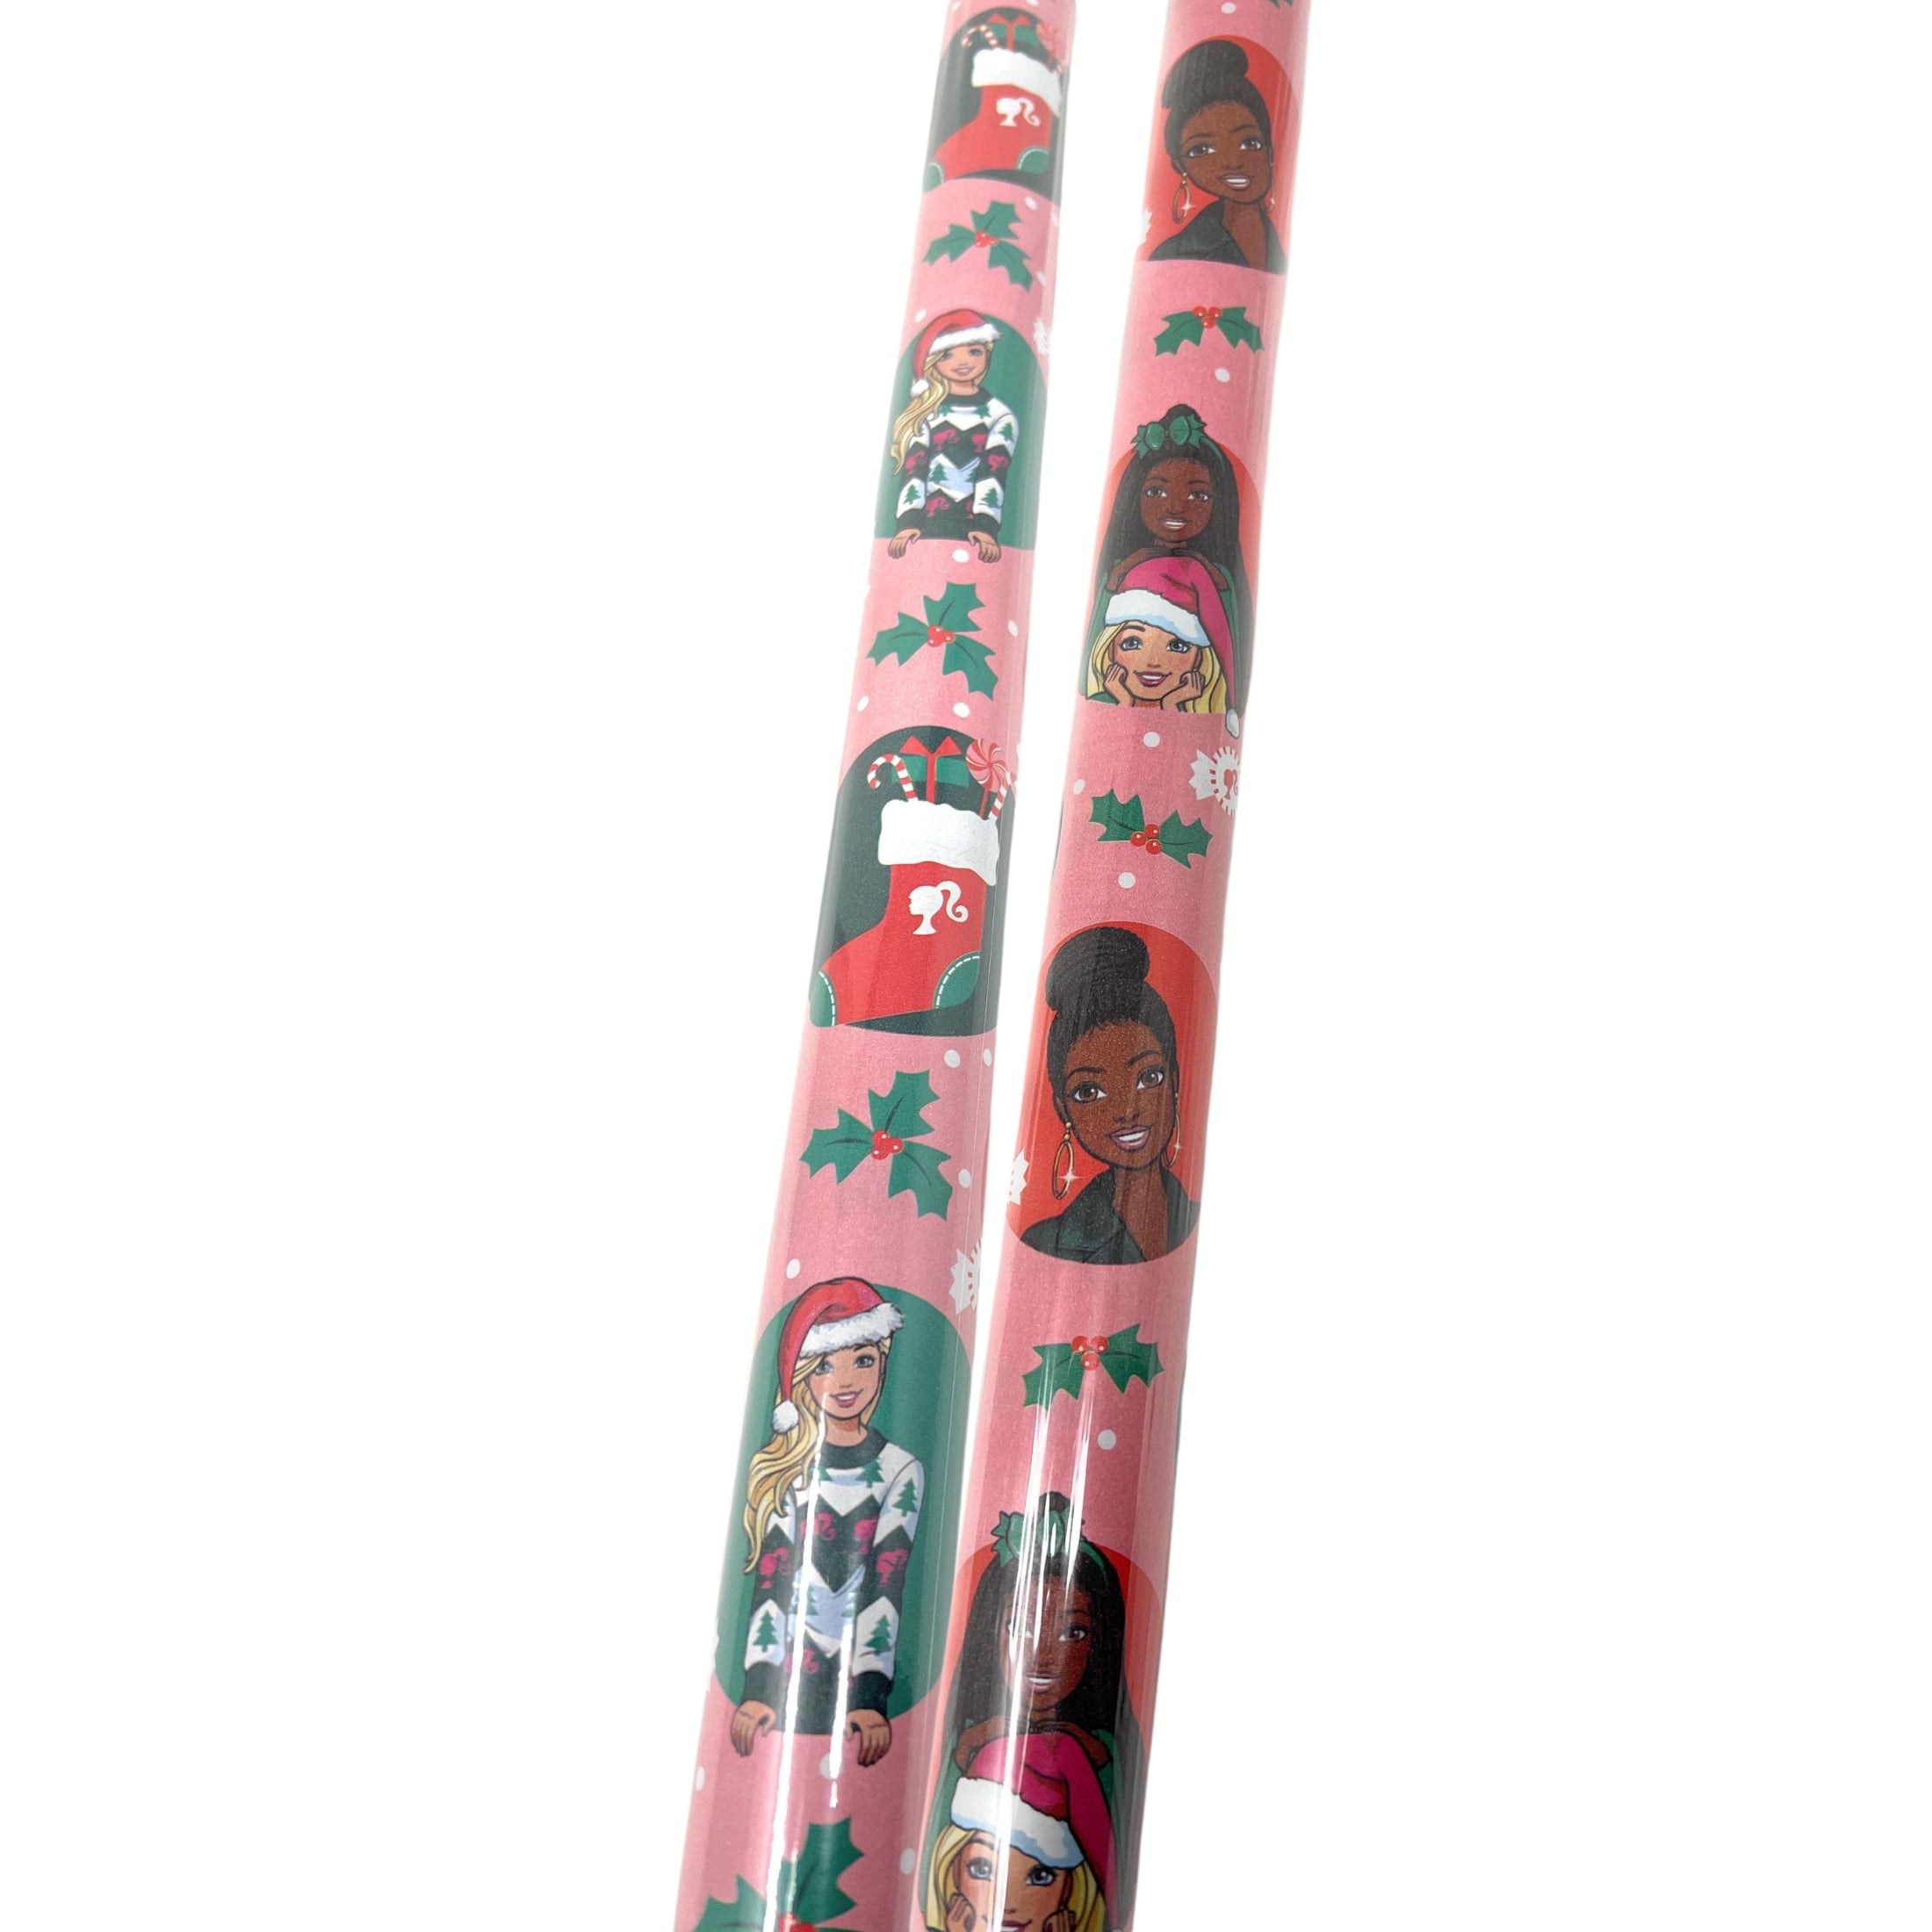 Barbie Gift Wrap Paper  Playful Barbie-Themed Wrapping sold by